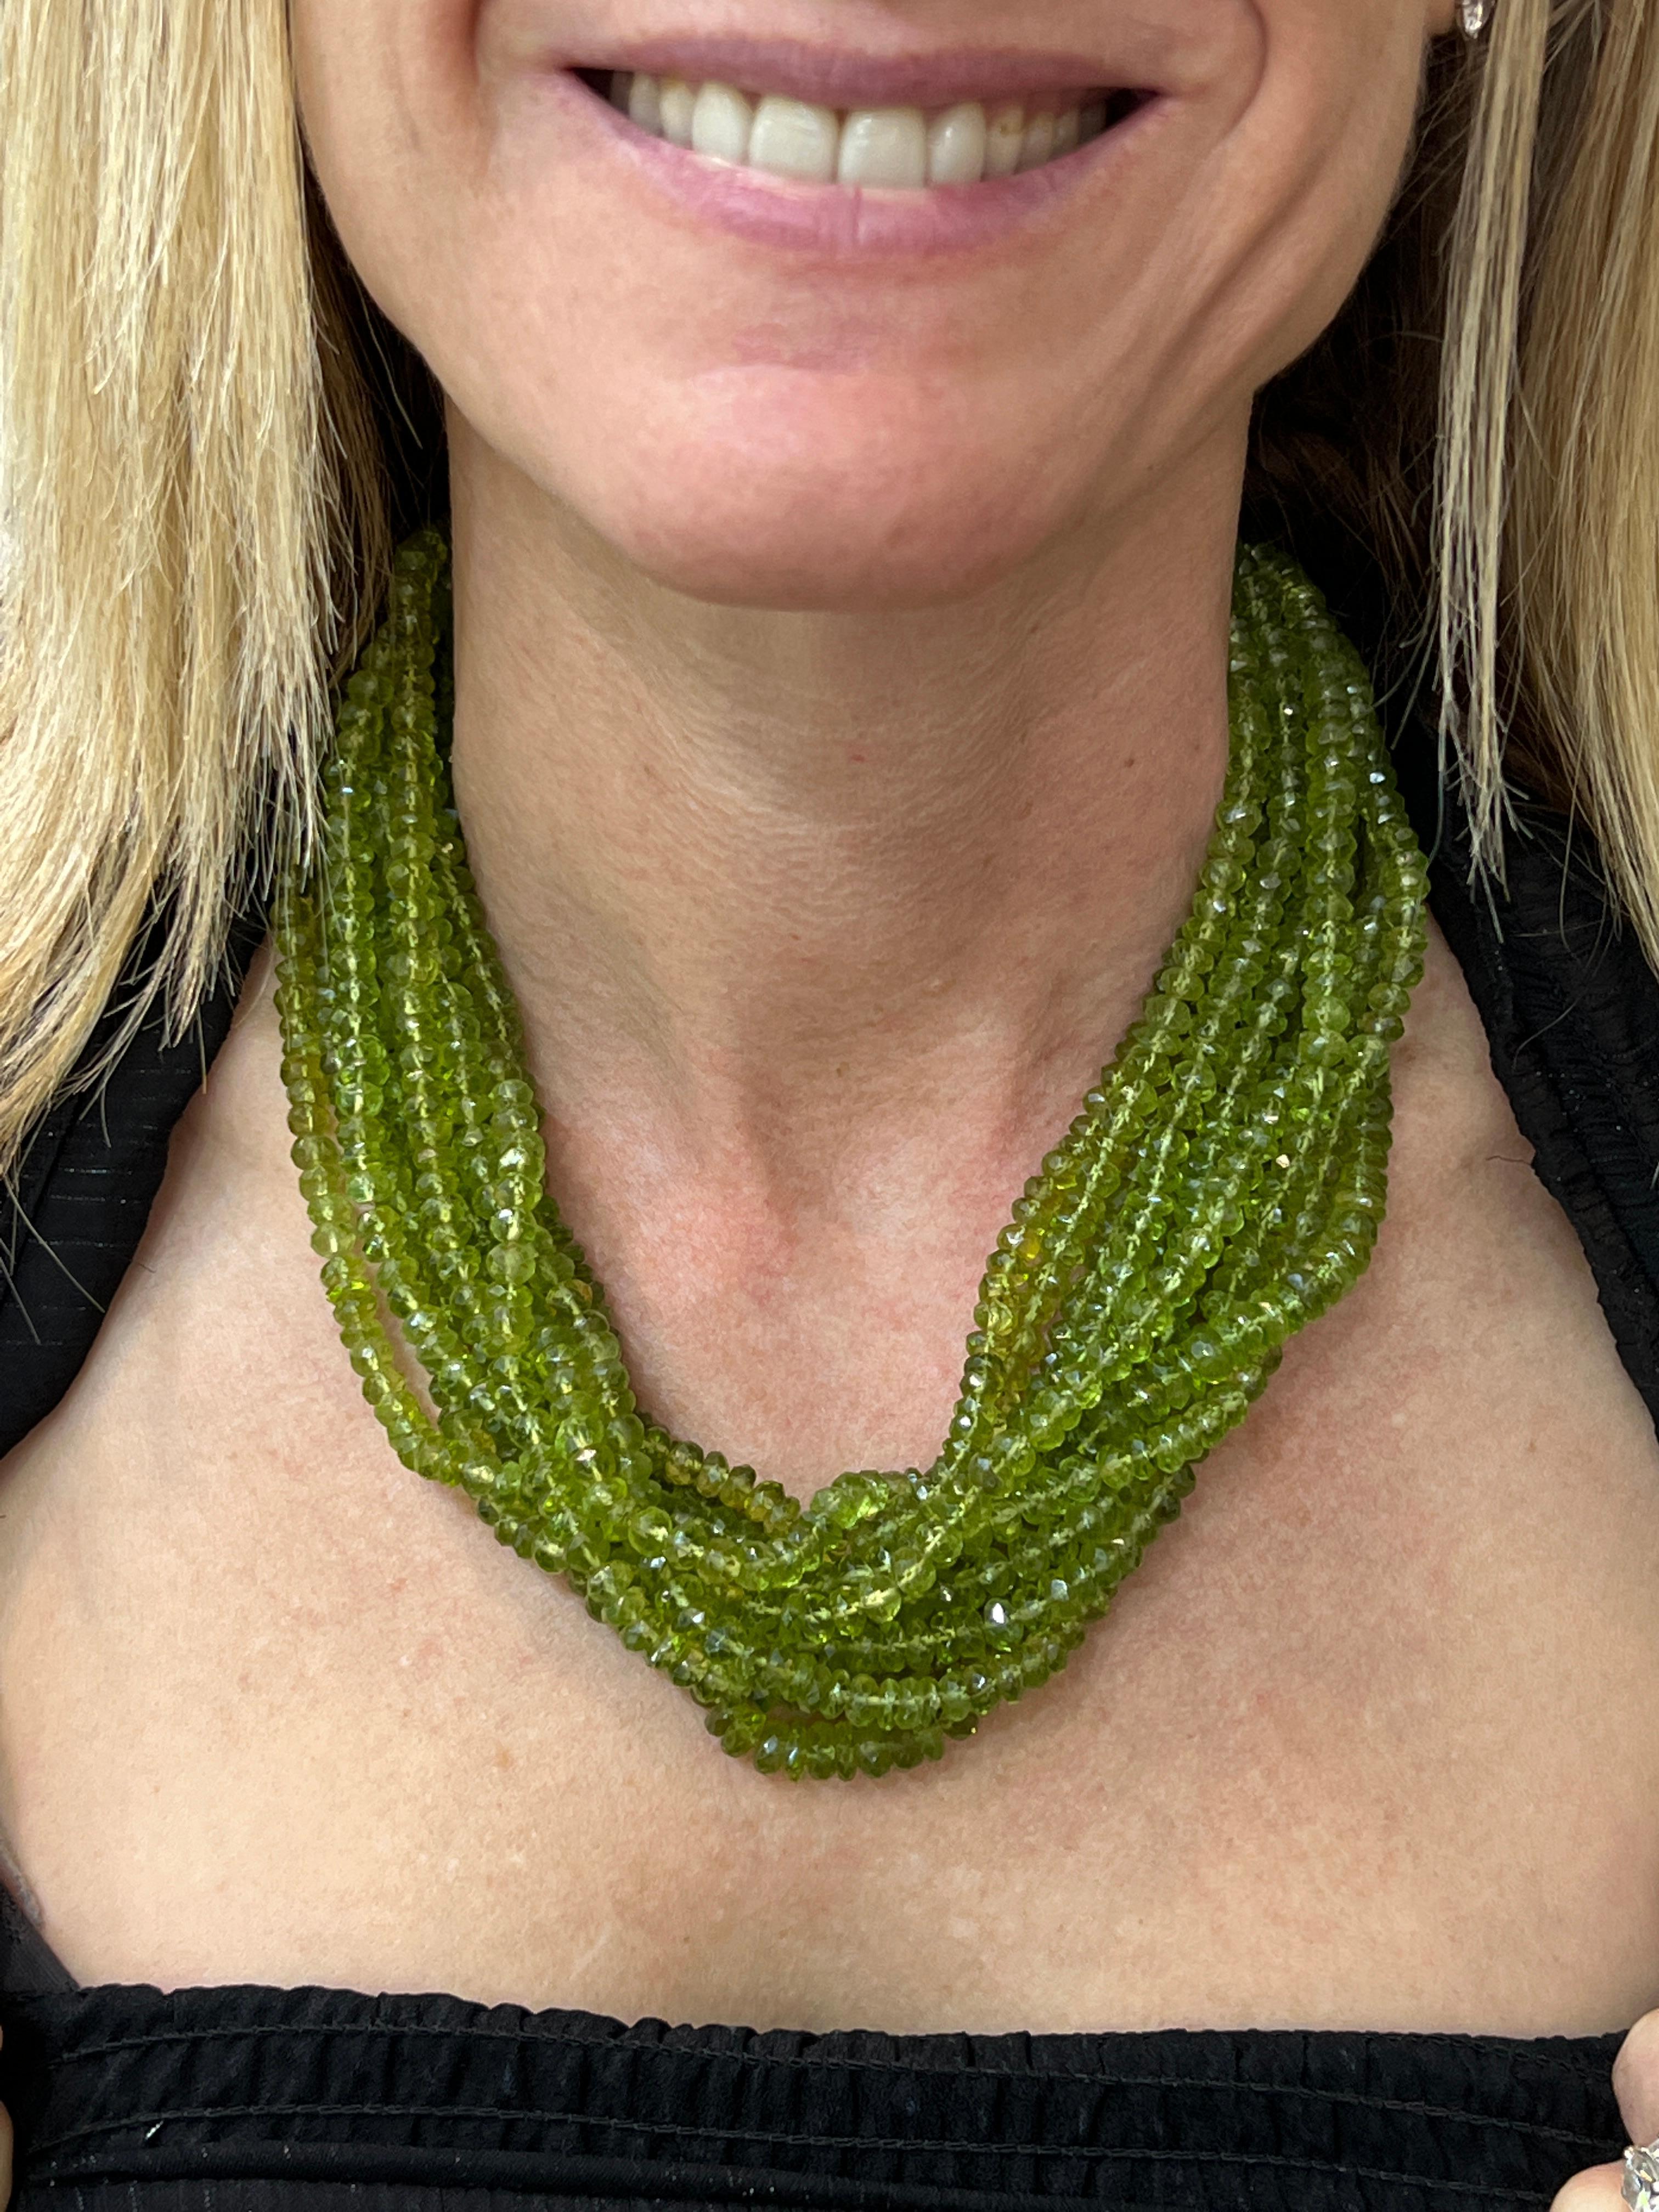 Rare vintage peridot bead necklace by  designer Tiffany  & Co. The vintage necklace features 12 strands of natural green peridot gemstones with an 18 karat white gold and diamond clasp. The clasp is set with 30 round brilliant cut diamonds weighing